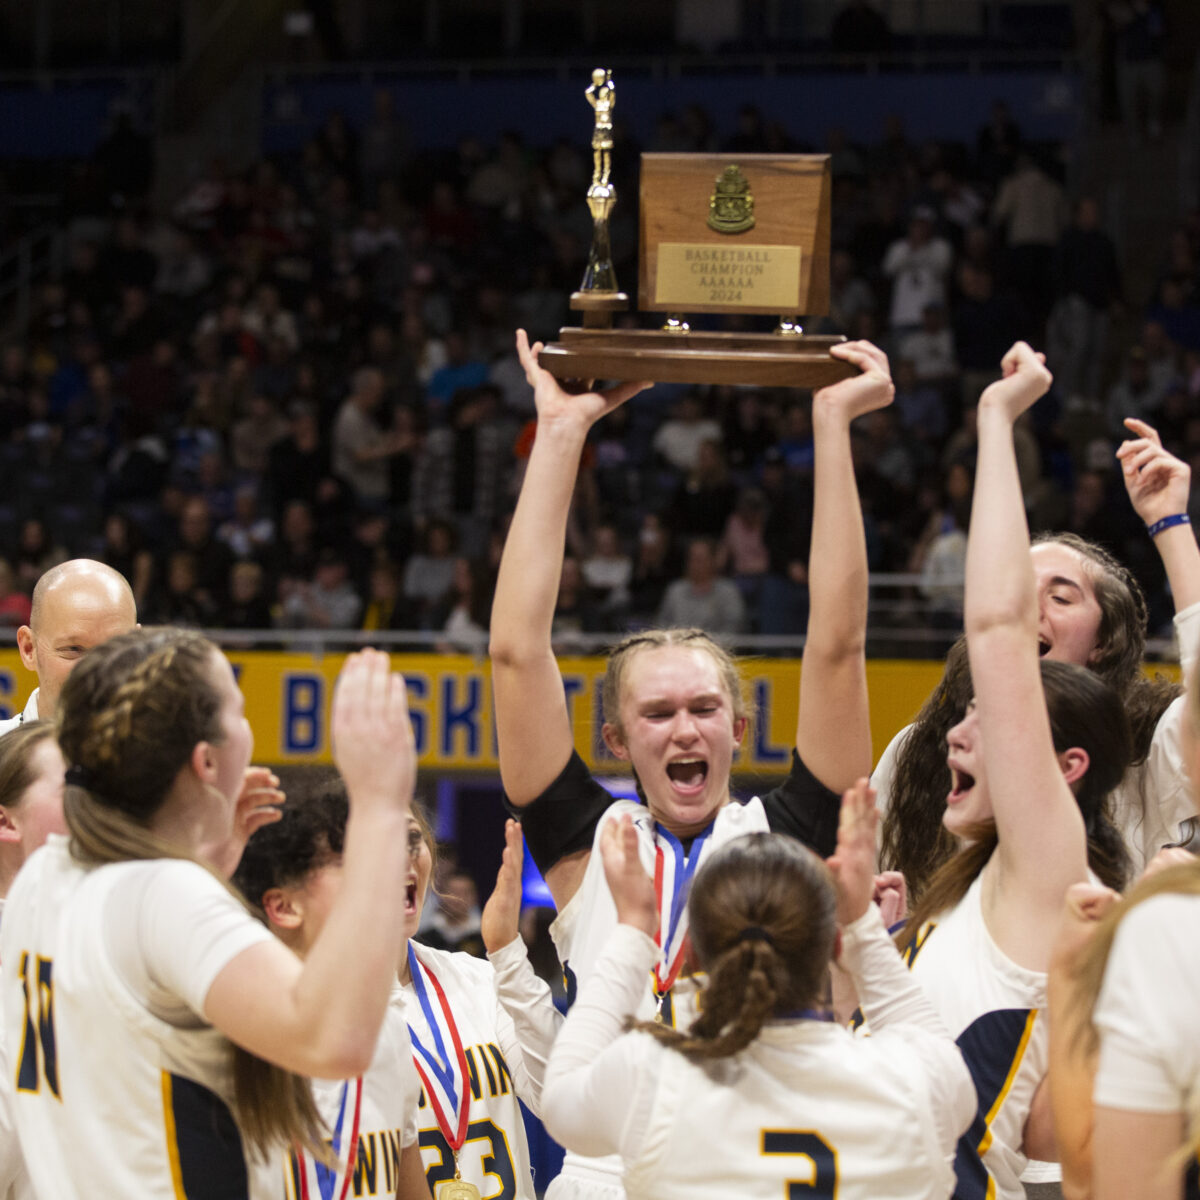 WPIAL Class 6A girls basketball championship: Norwin dethrones mighty North Allegheny to claim first title since 2016